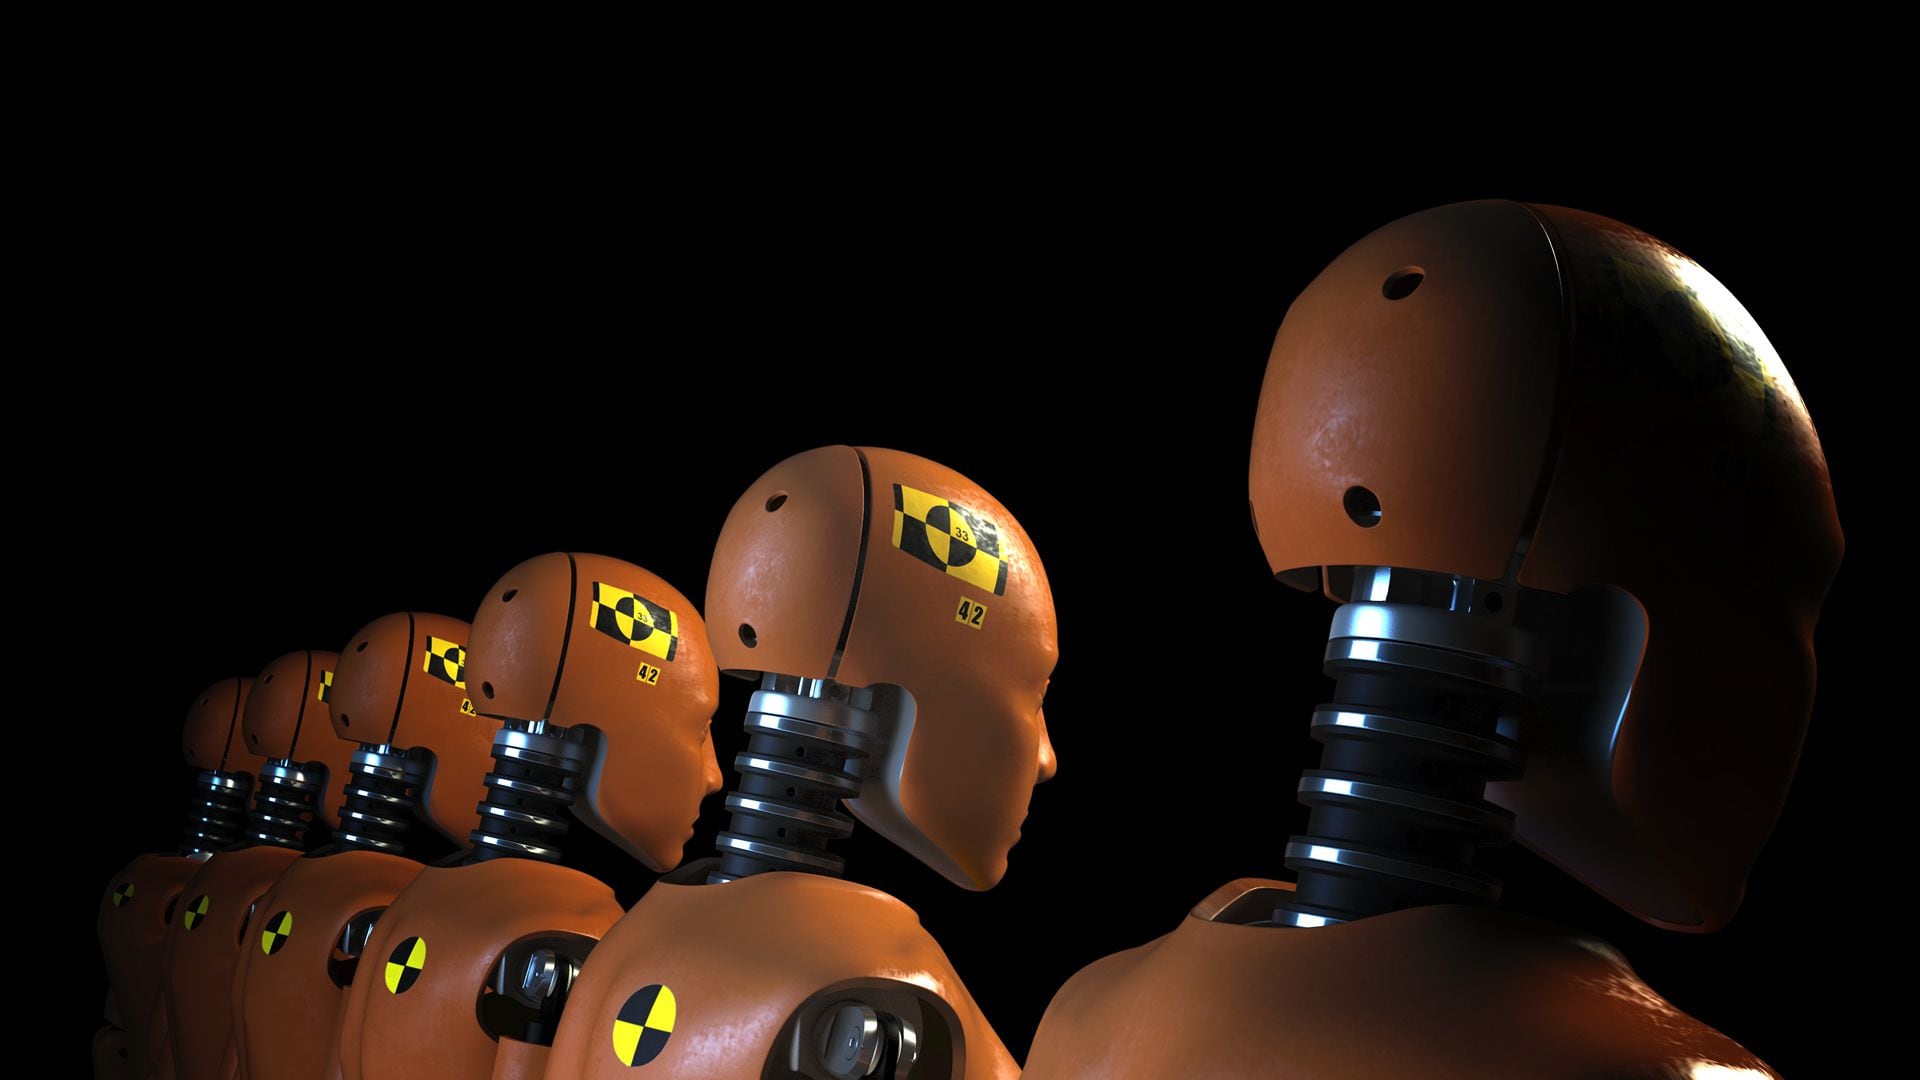 Crash test dummies need a precise ambient temperature so their sensors can function properly (Shutterstock)